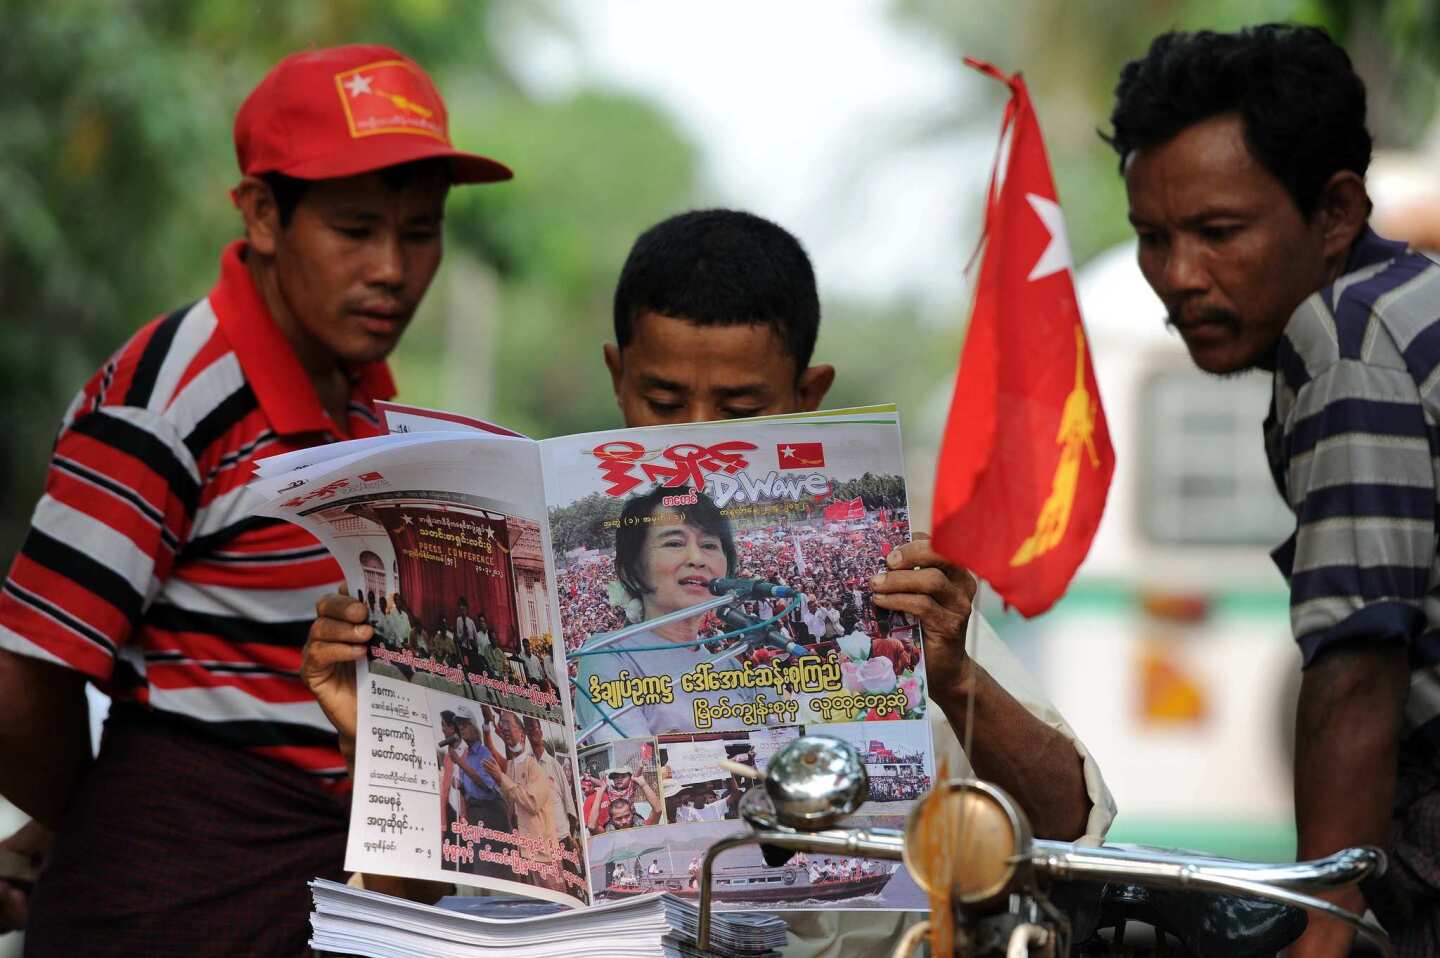 Myanmar people catch up on election news